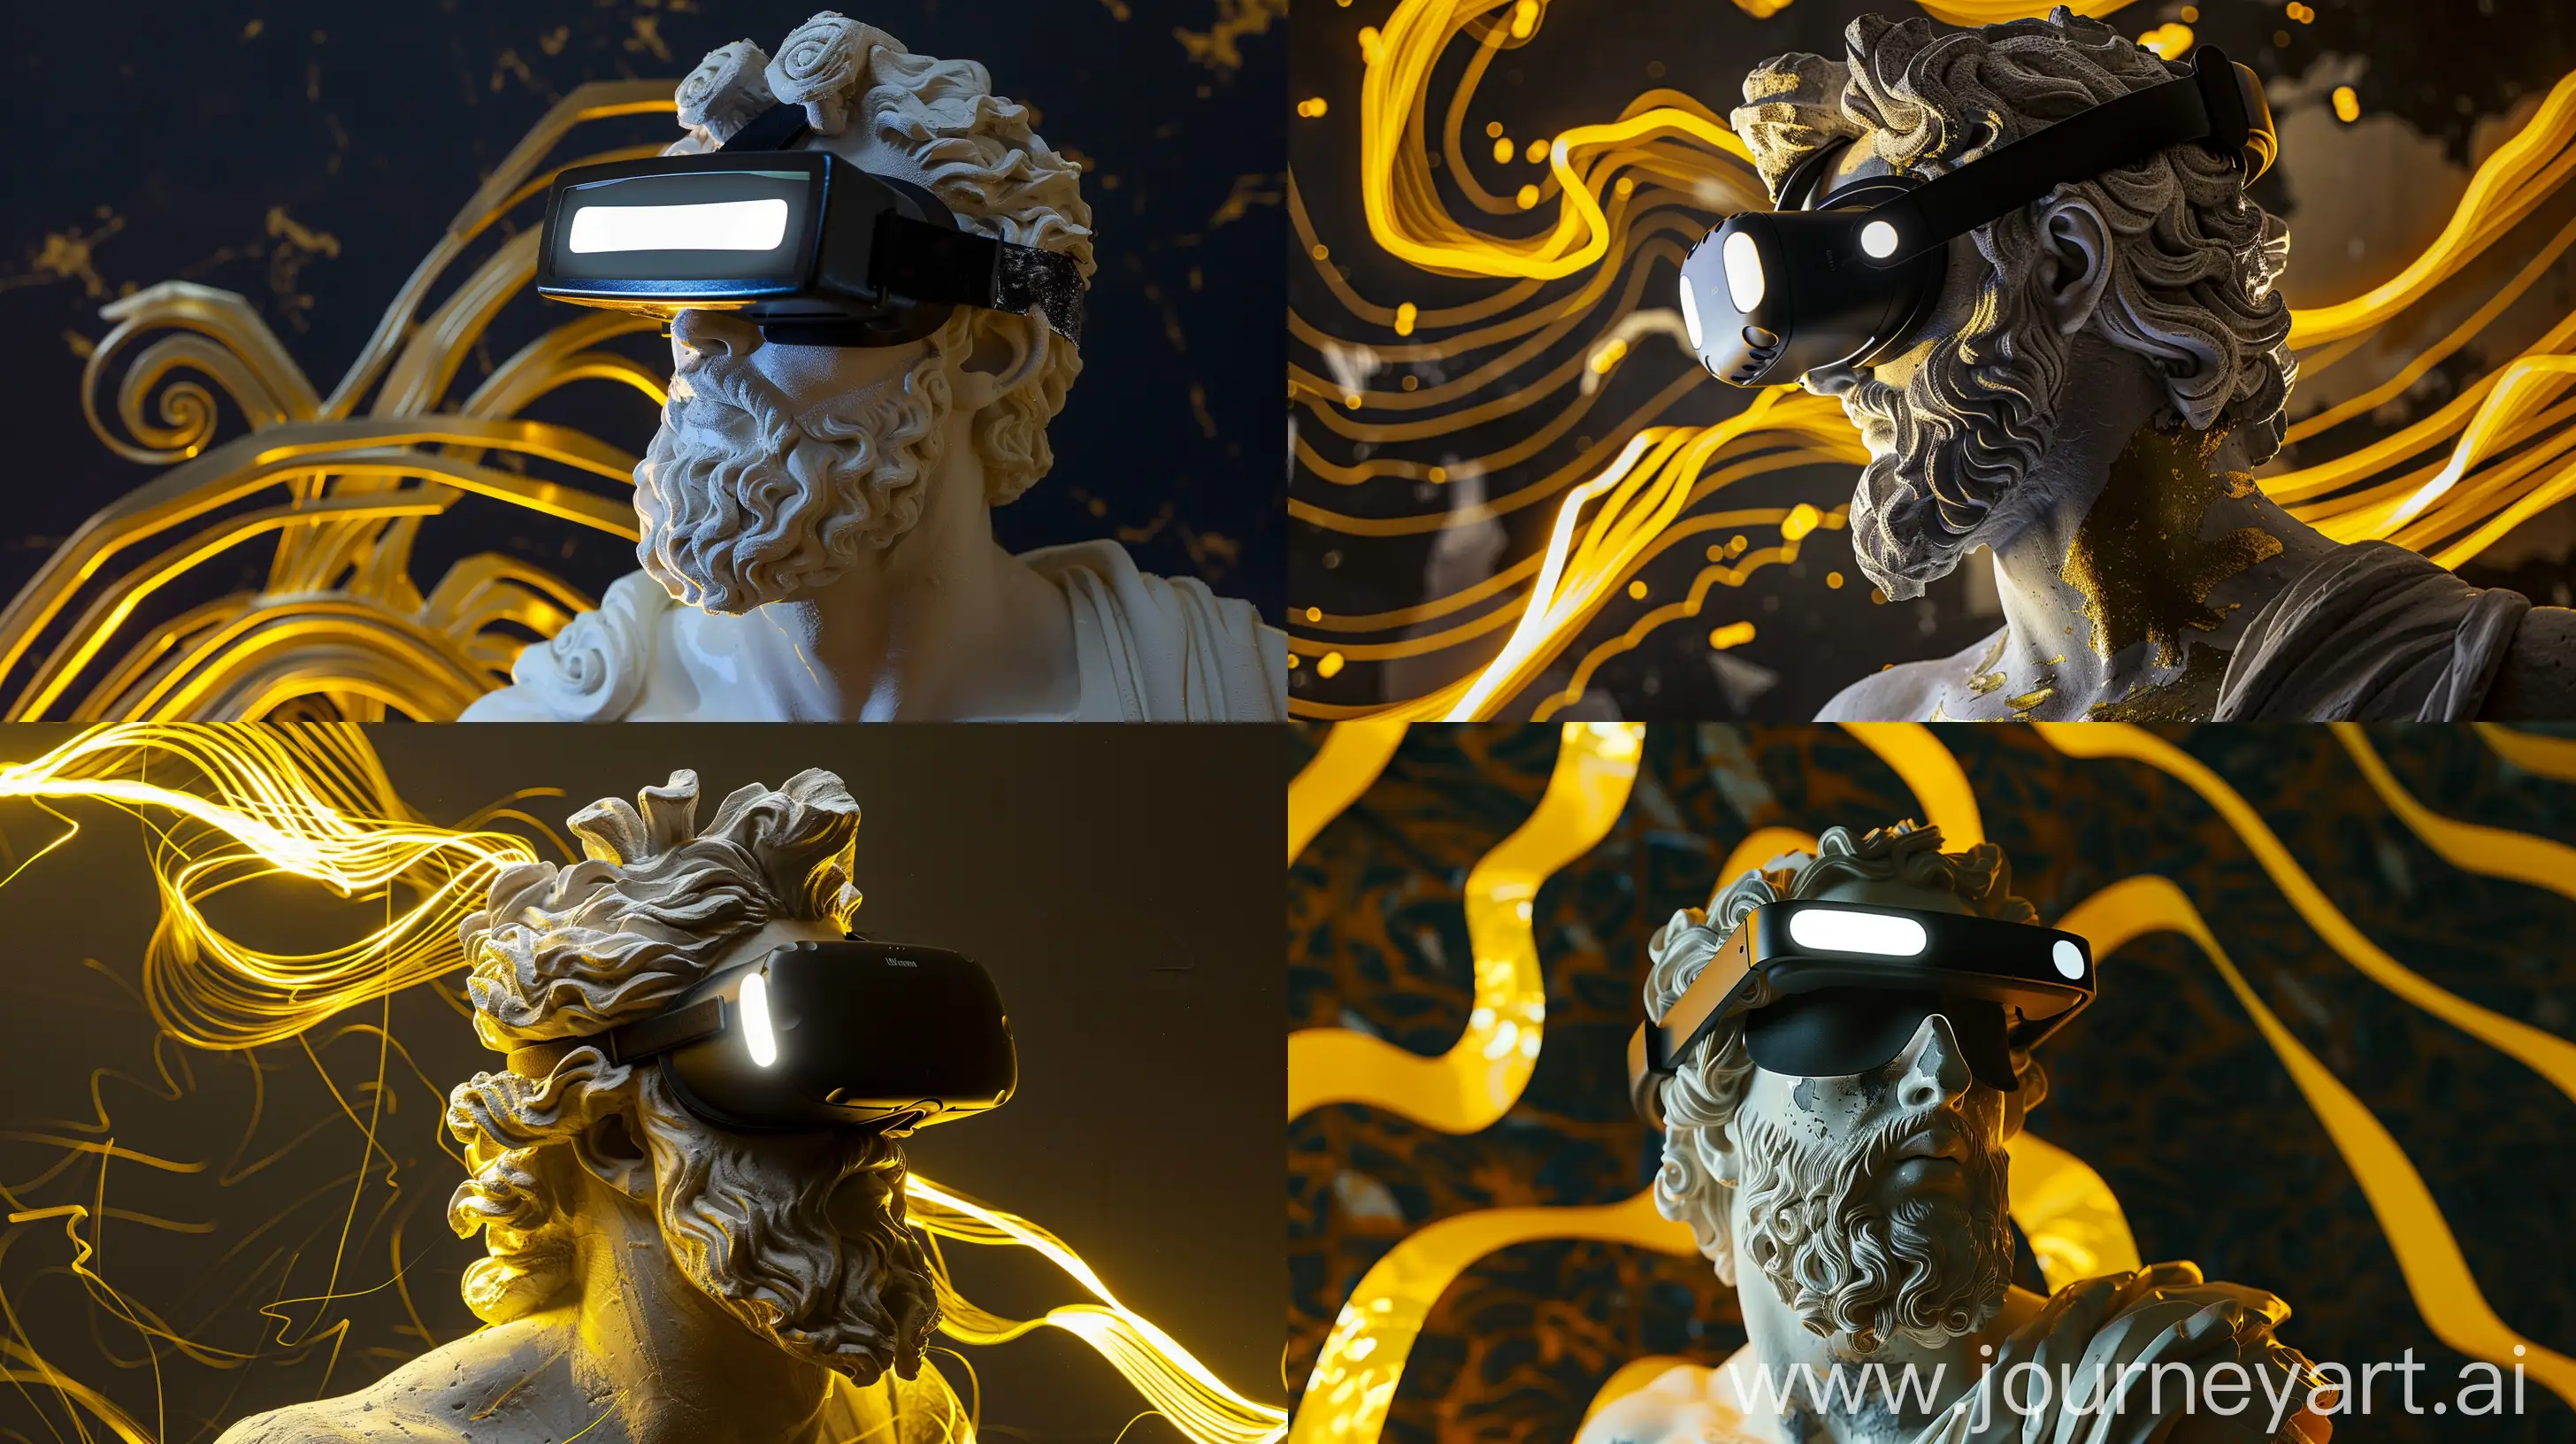 Dreamy-Pose-of-Zeus-Sculpture-with-Black-VR-Glasses-and-Gold-Abstract-Wave-Pattern